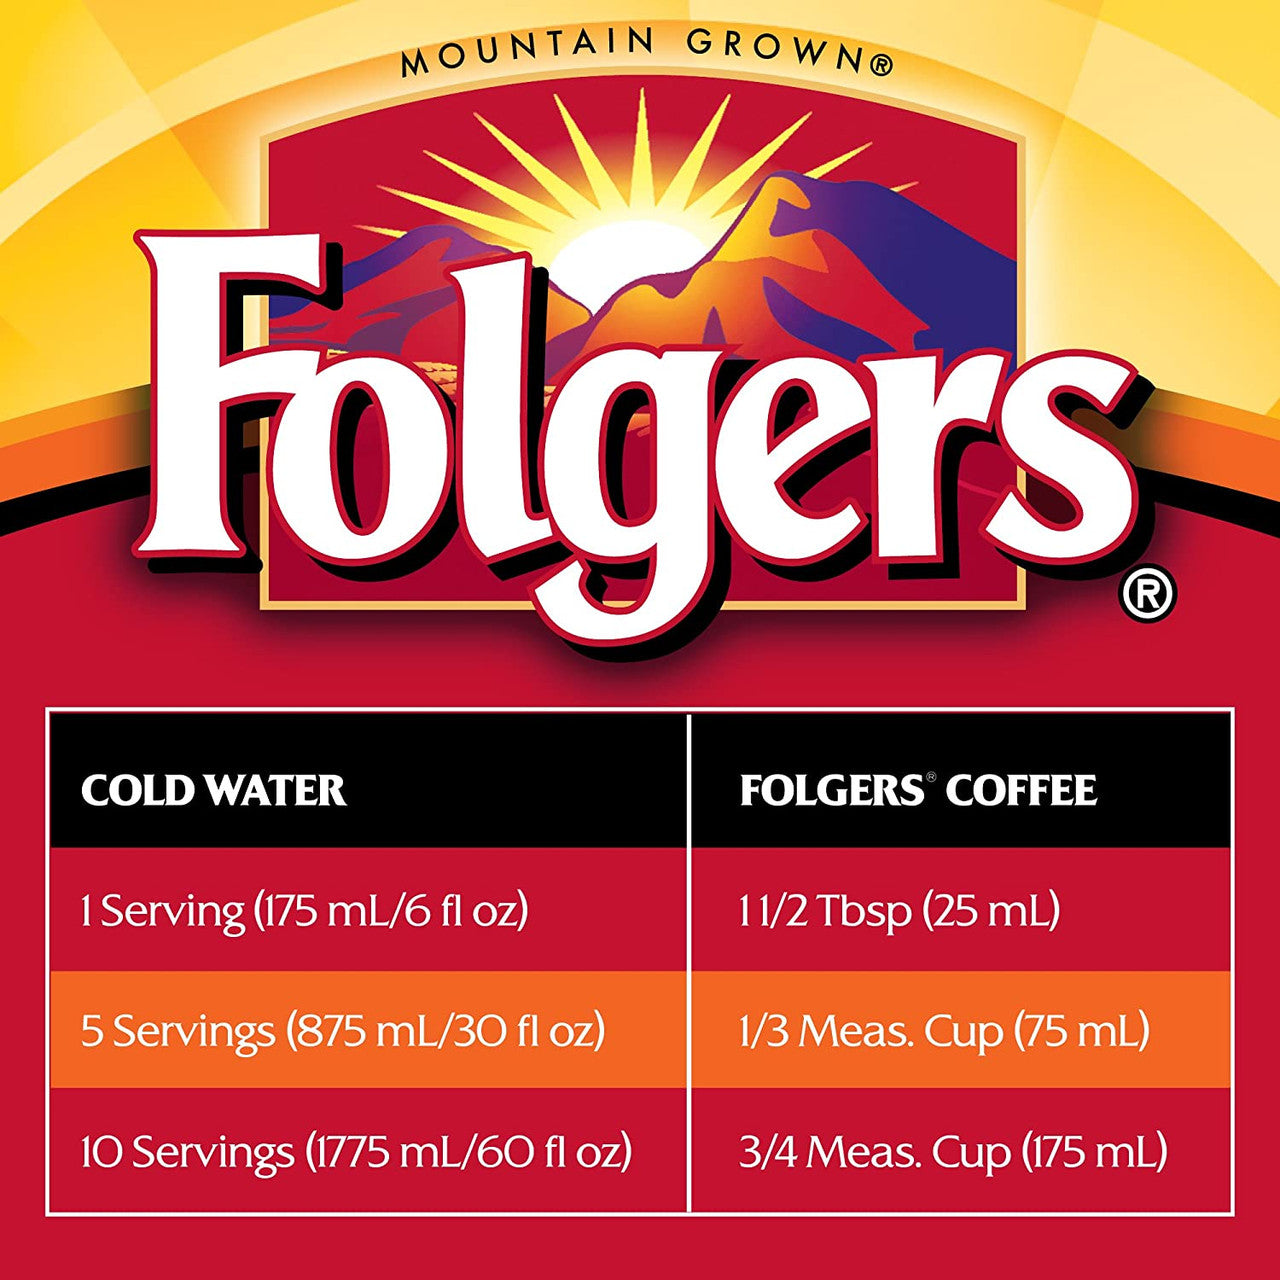 Folgers Black Silk Ground Coffee, 750g/26.5 oz., (6pk) {Imported from Canada}